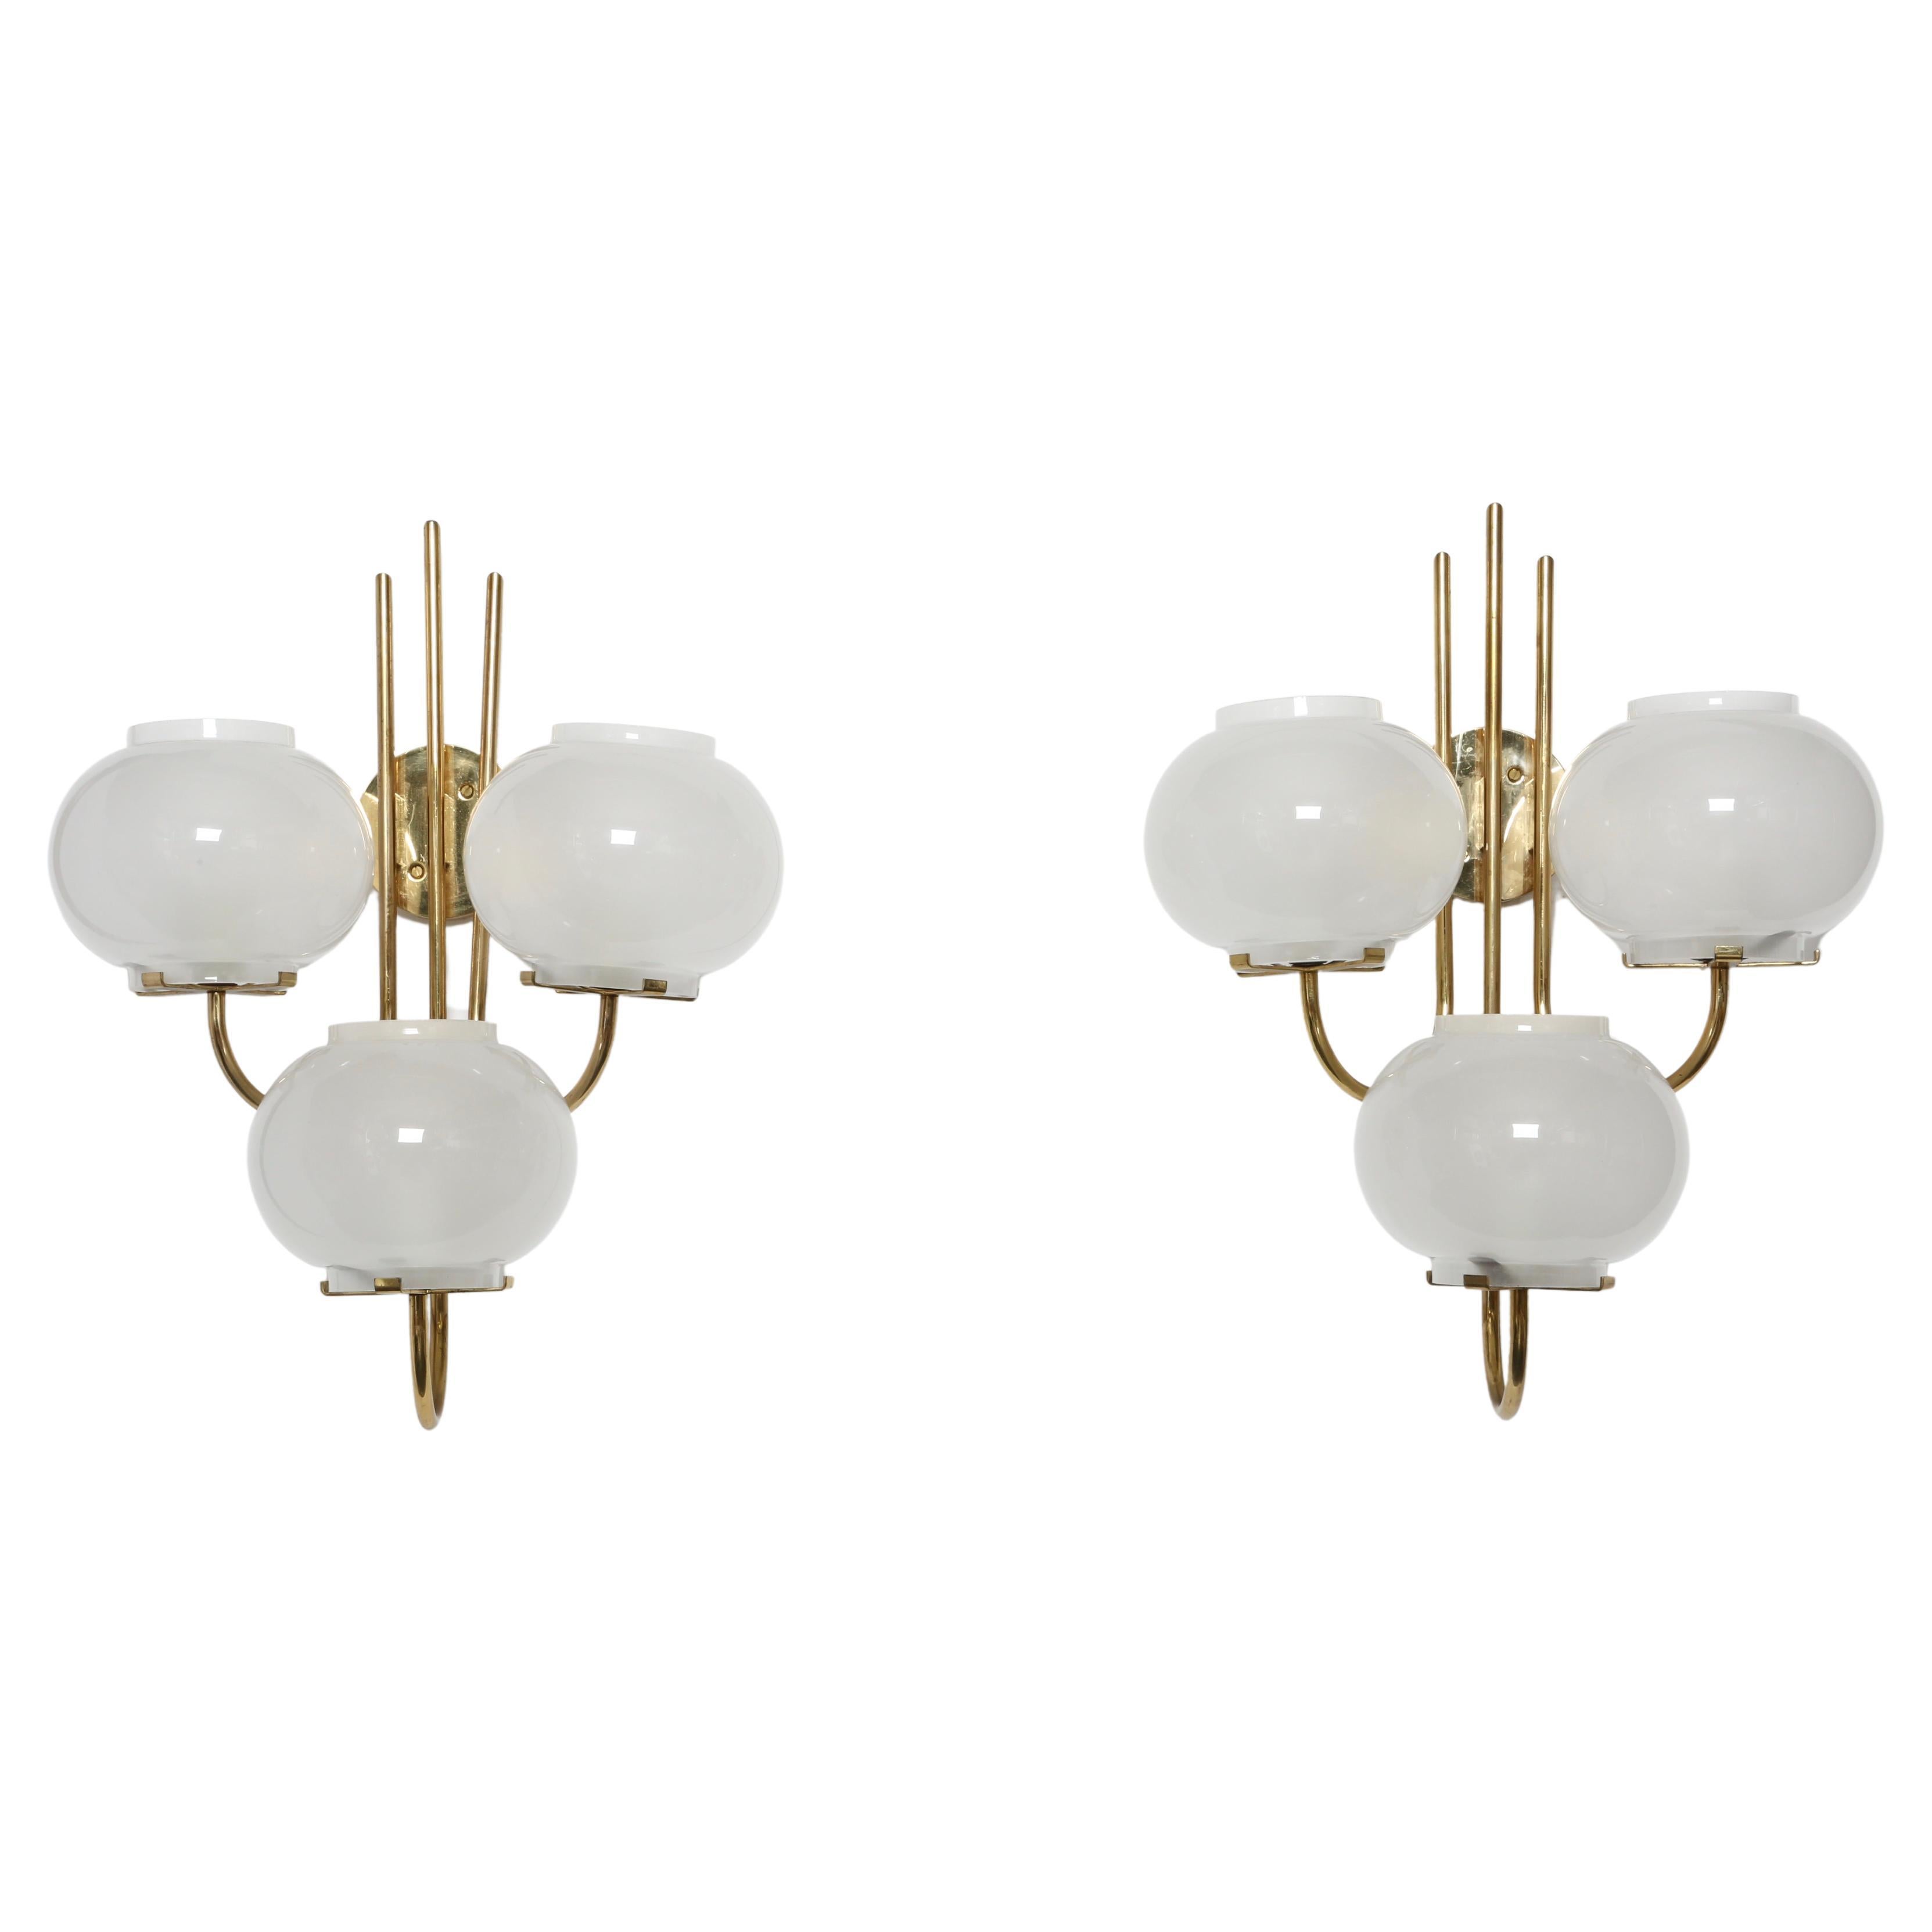 Pair of sconces by Tito Agnoli for Oluce